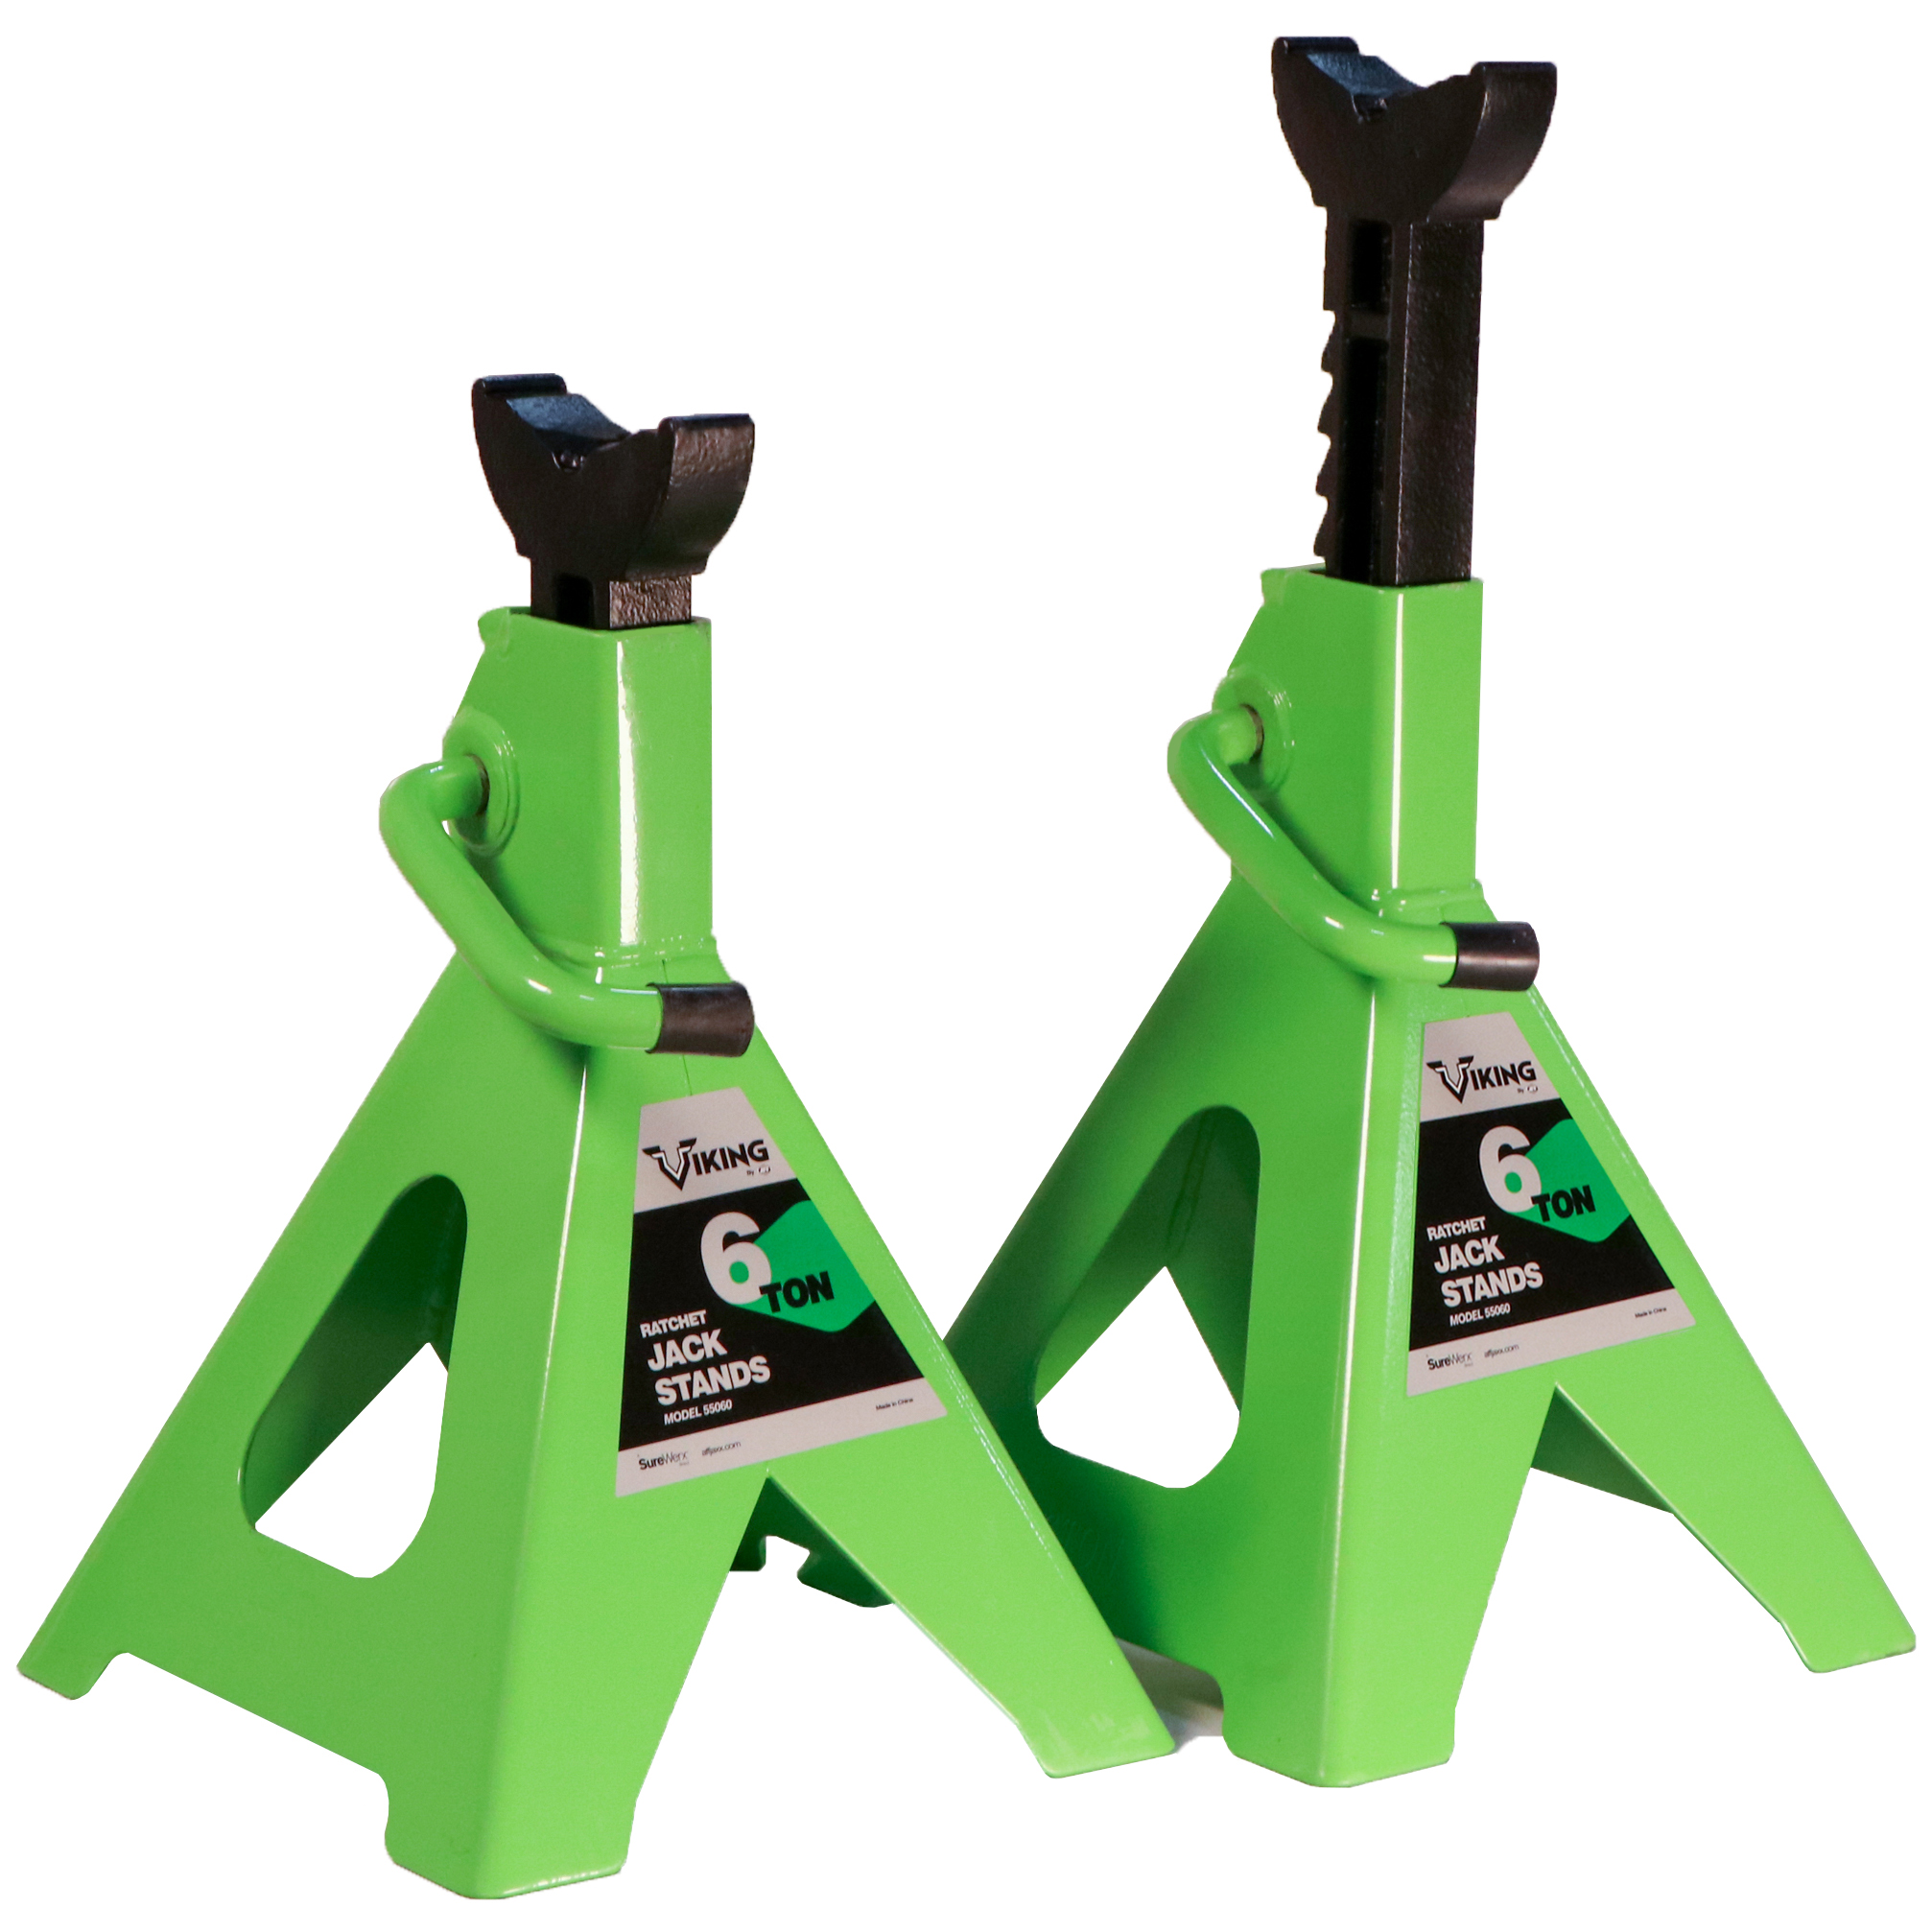 Viking Air Tools - 6 TON VEHICLE STANDS PR RATCHET STYLE -  55060